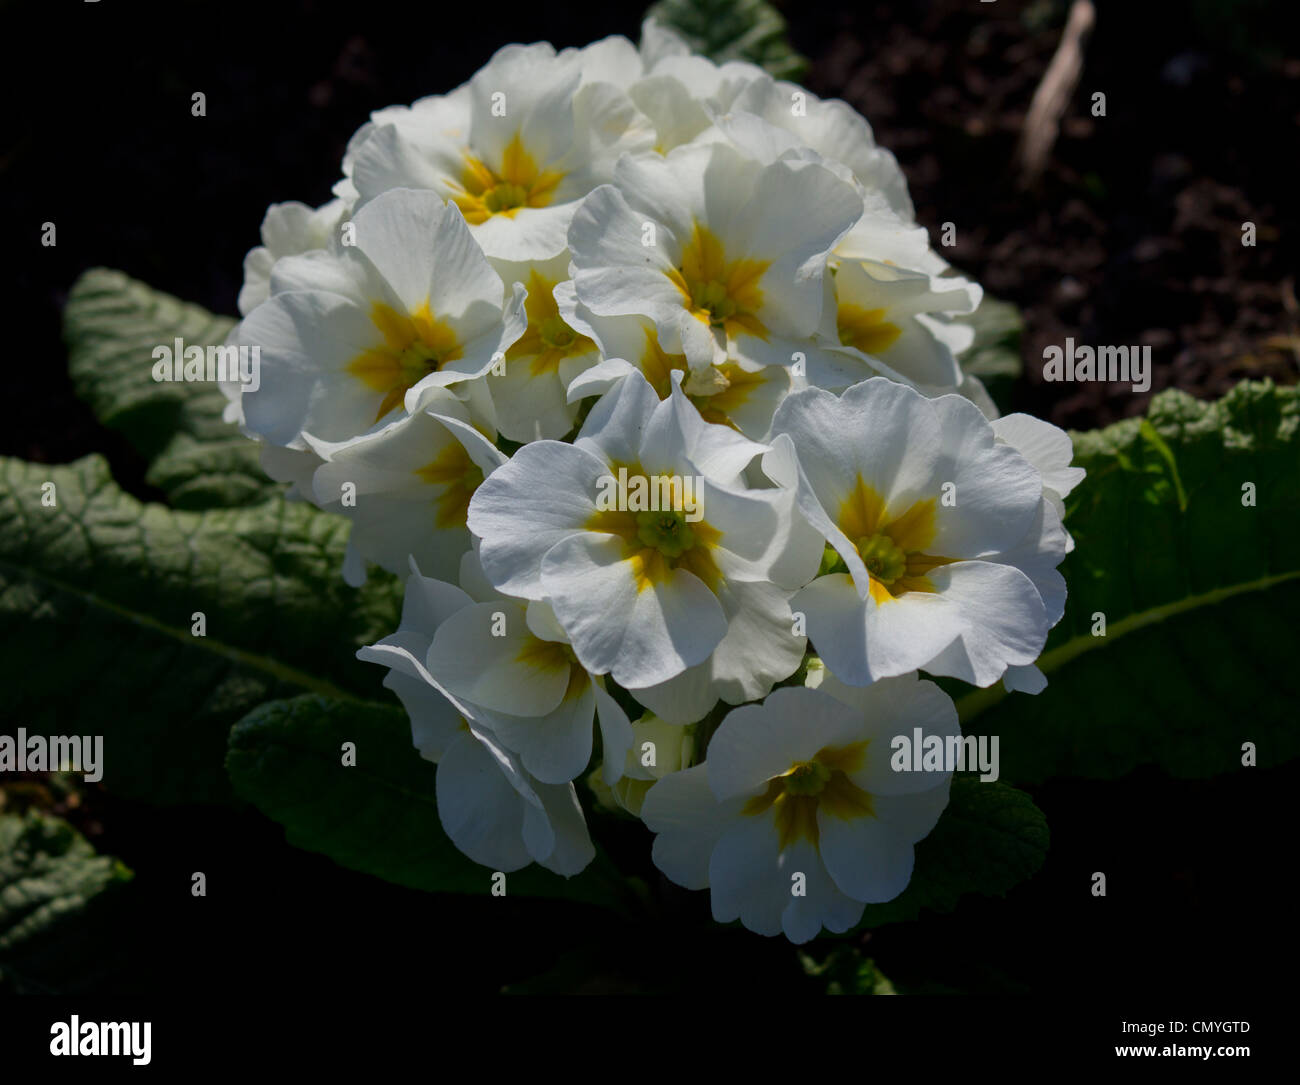 White pansies in bloom Stock Photo